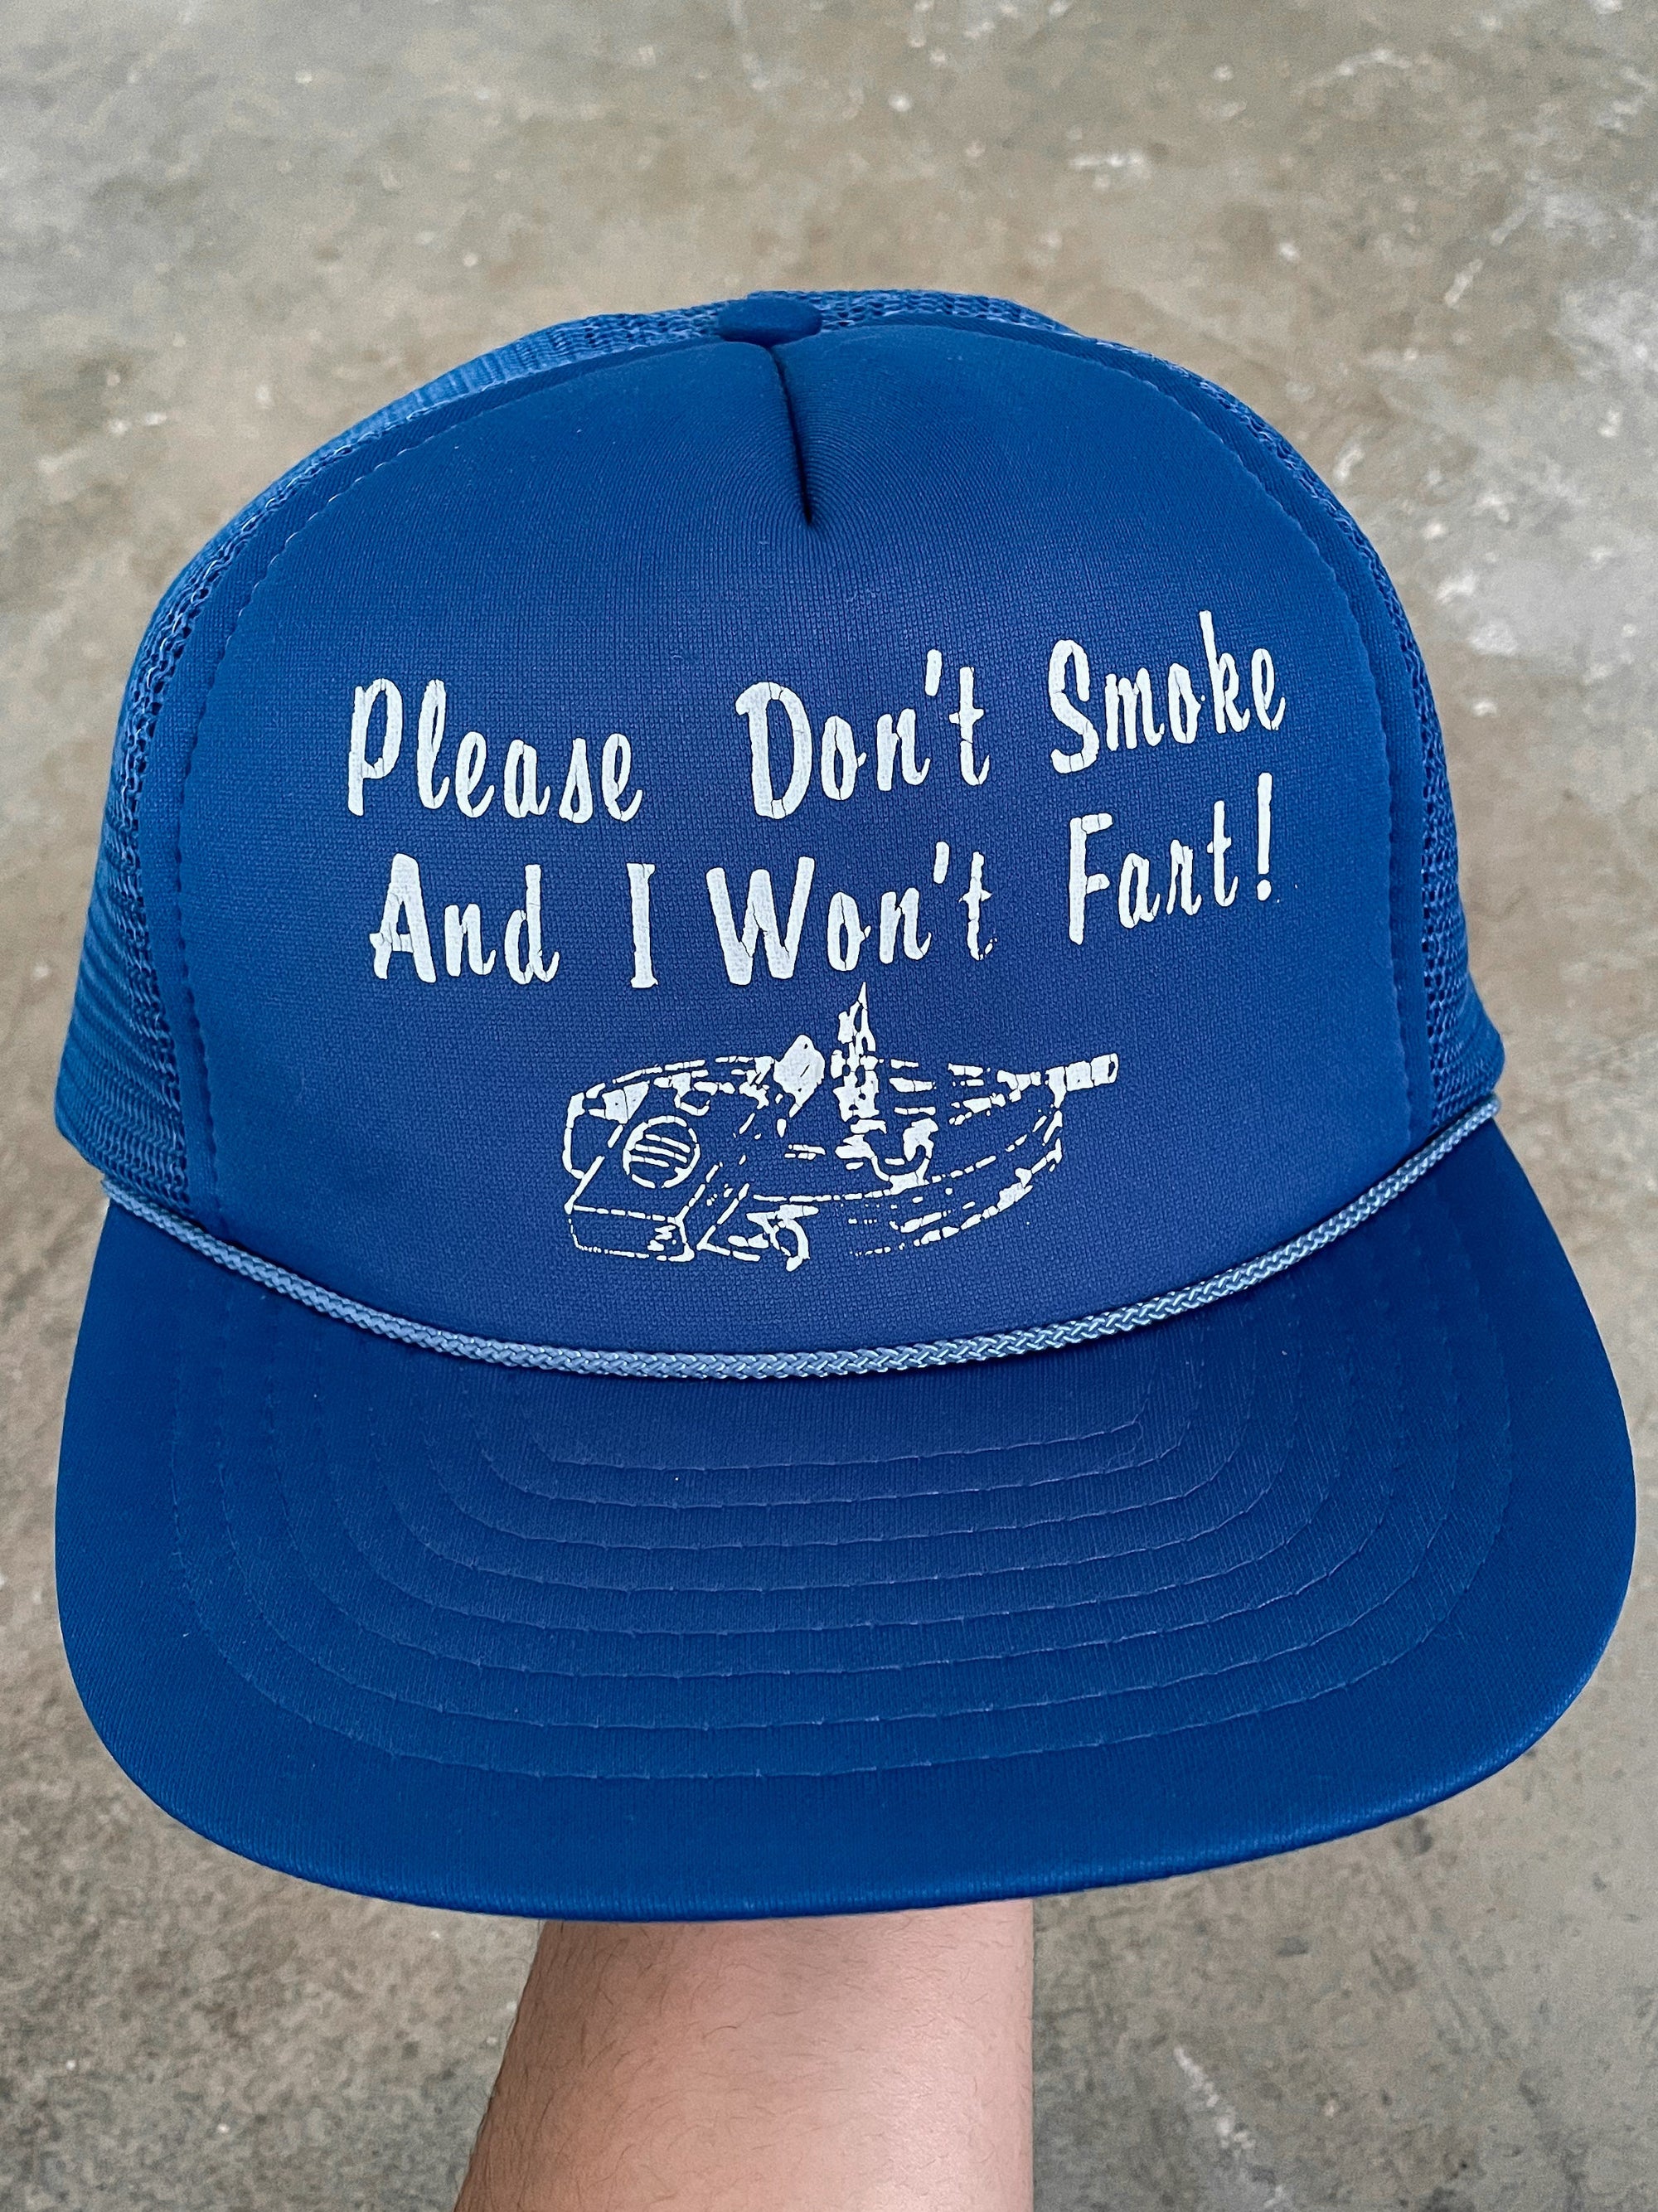 1990s “Please Don’t Smoke And I Won’t Fart!” Trucker Hat